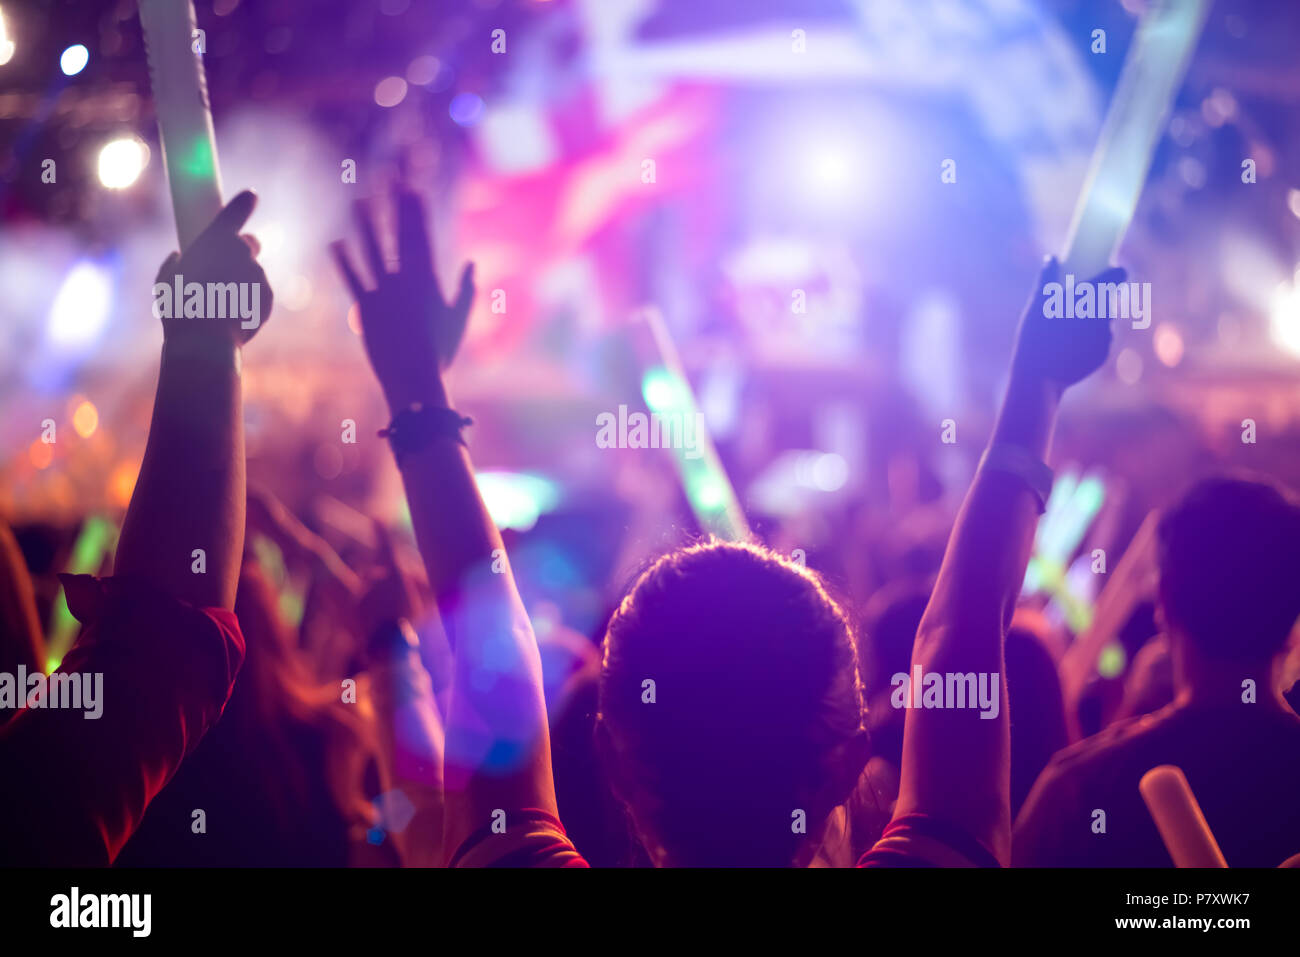 Rock concert party event. Music festival and Lighting stage concept. Youth and Fan club concept. People  and Lifestyle theme. Live stage show theme. Stock Photo